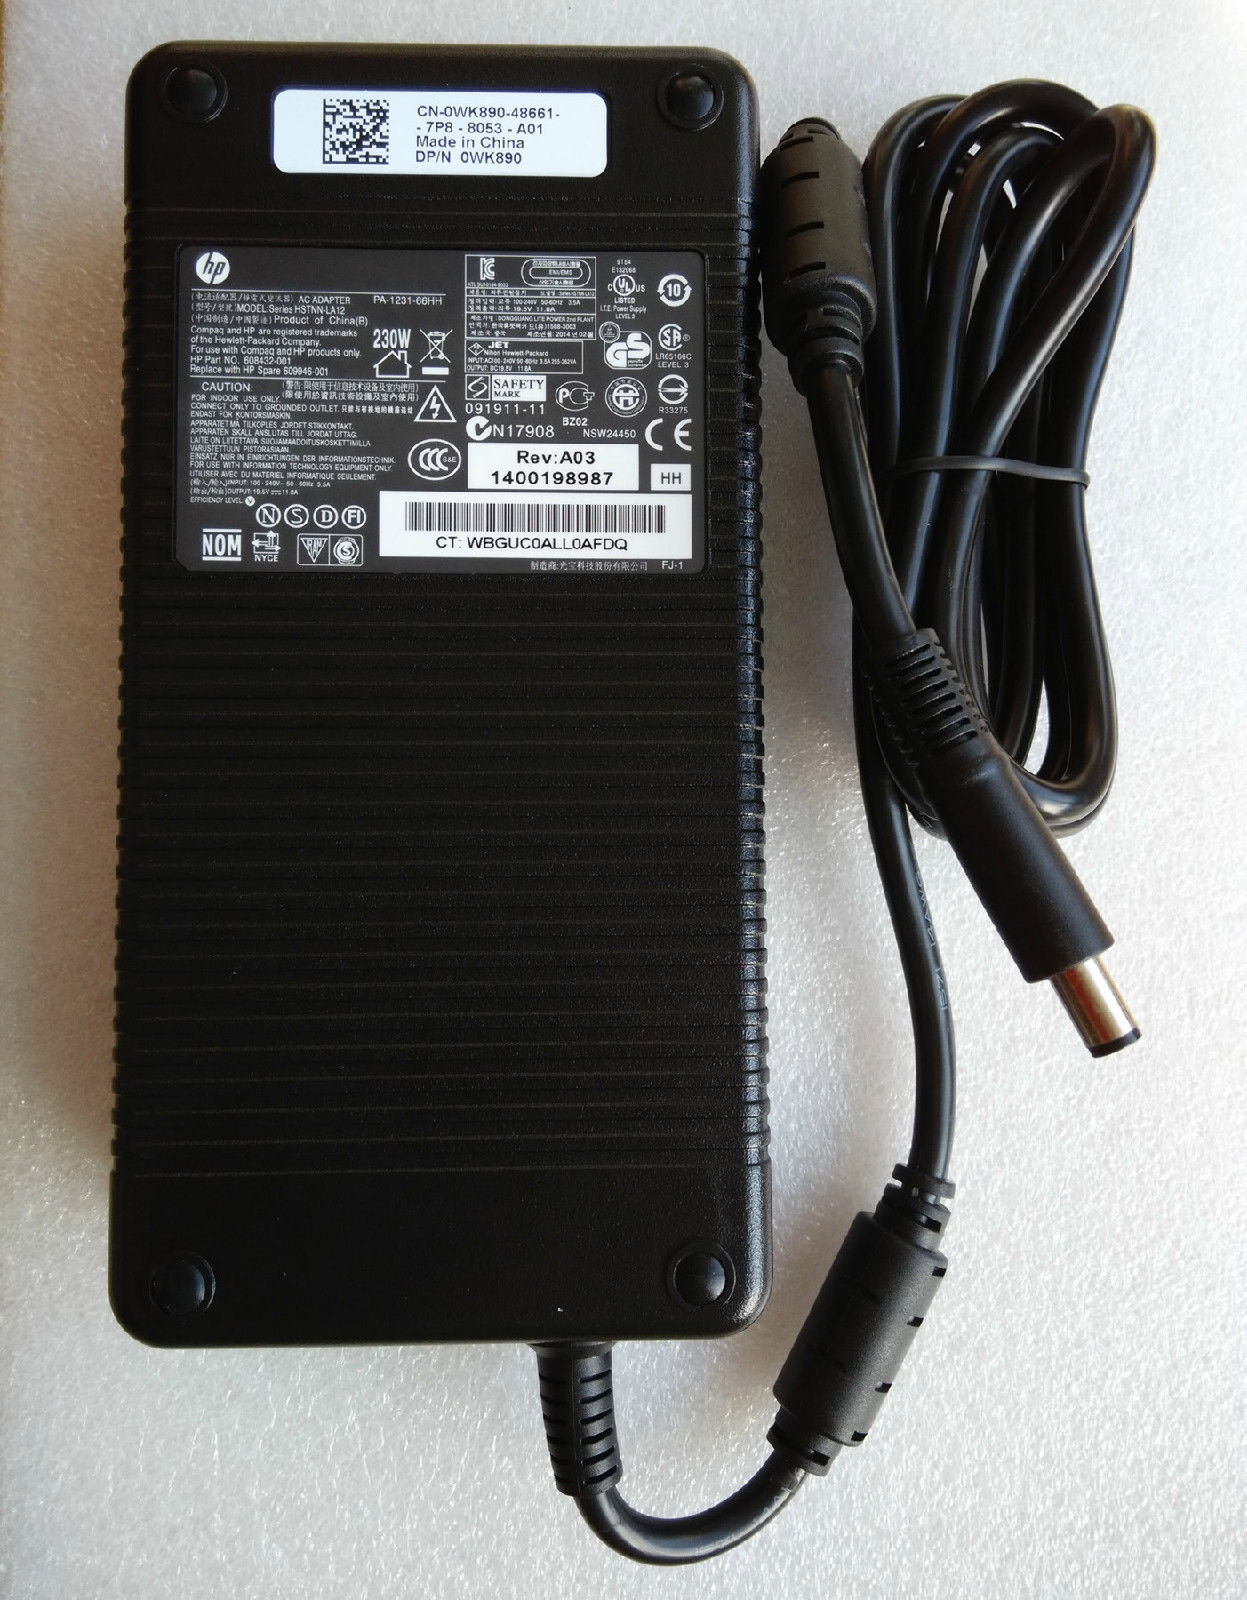 HP 19.5V 11.8A EliteBook 8740w Mobile Workstation AC Adapter - Click Image to Close